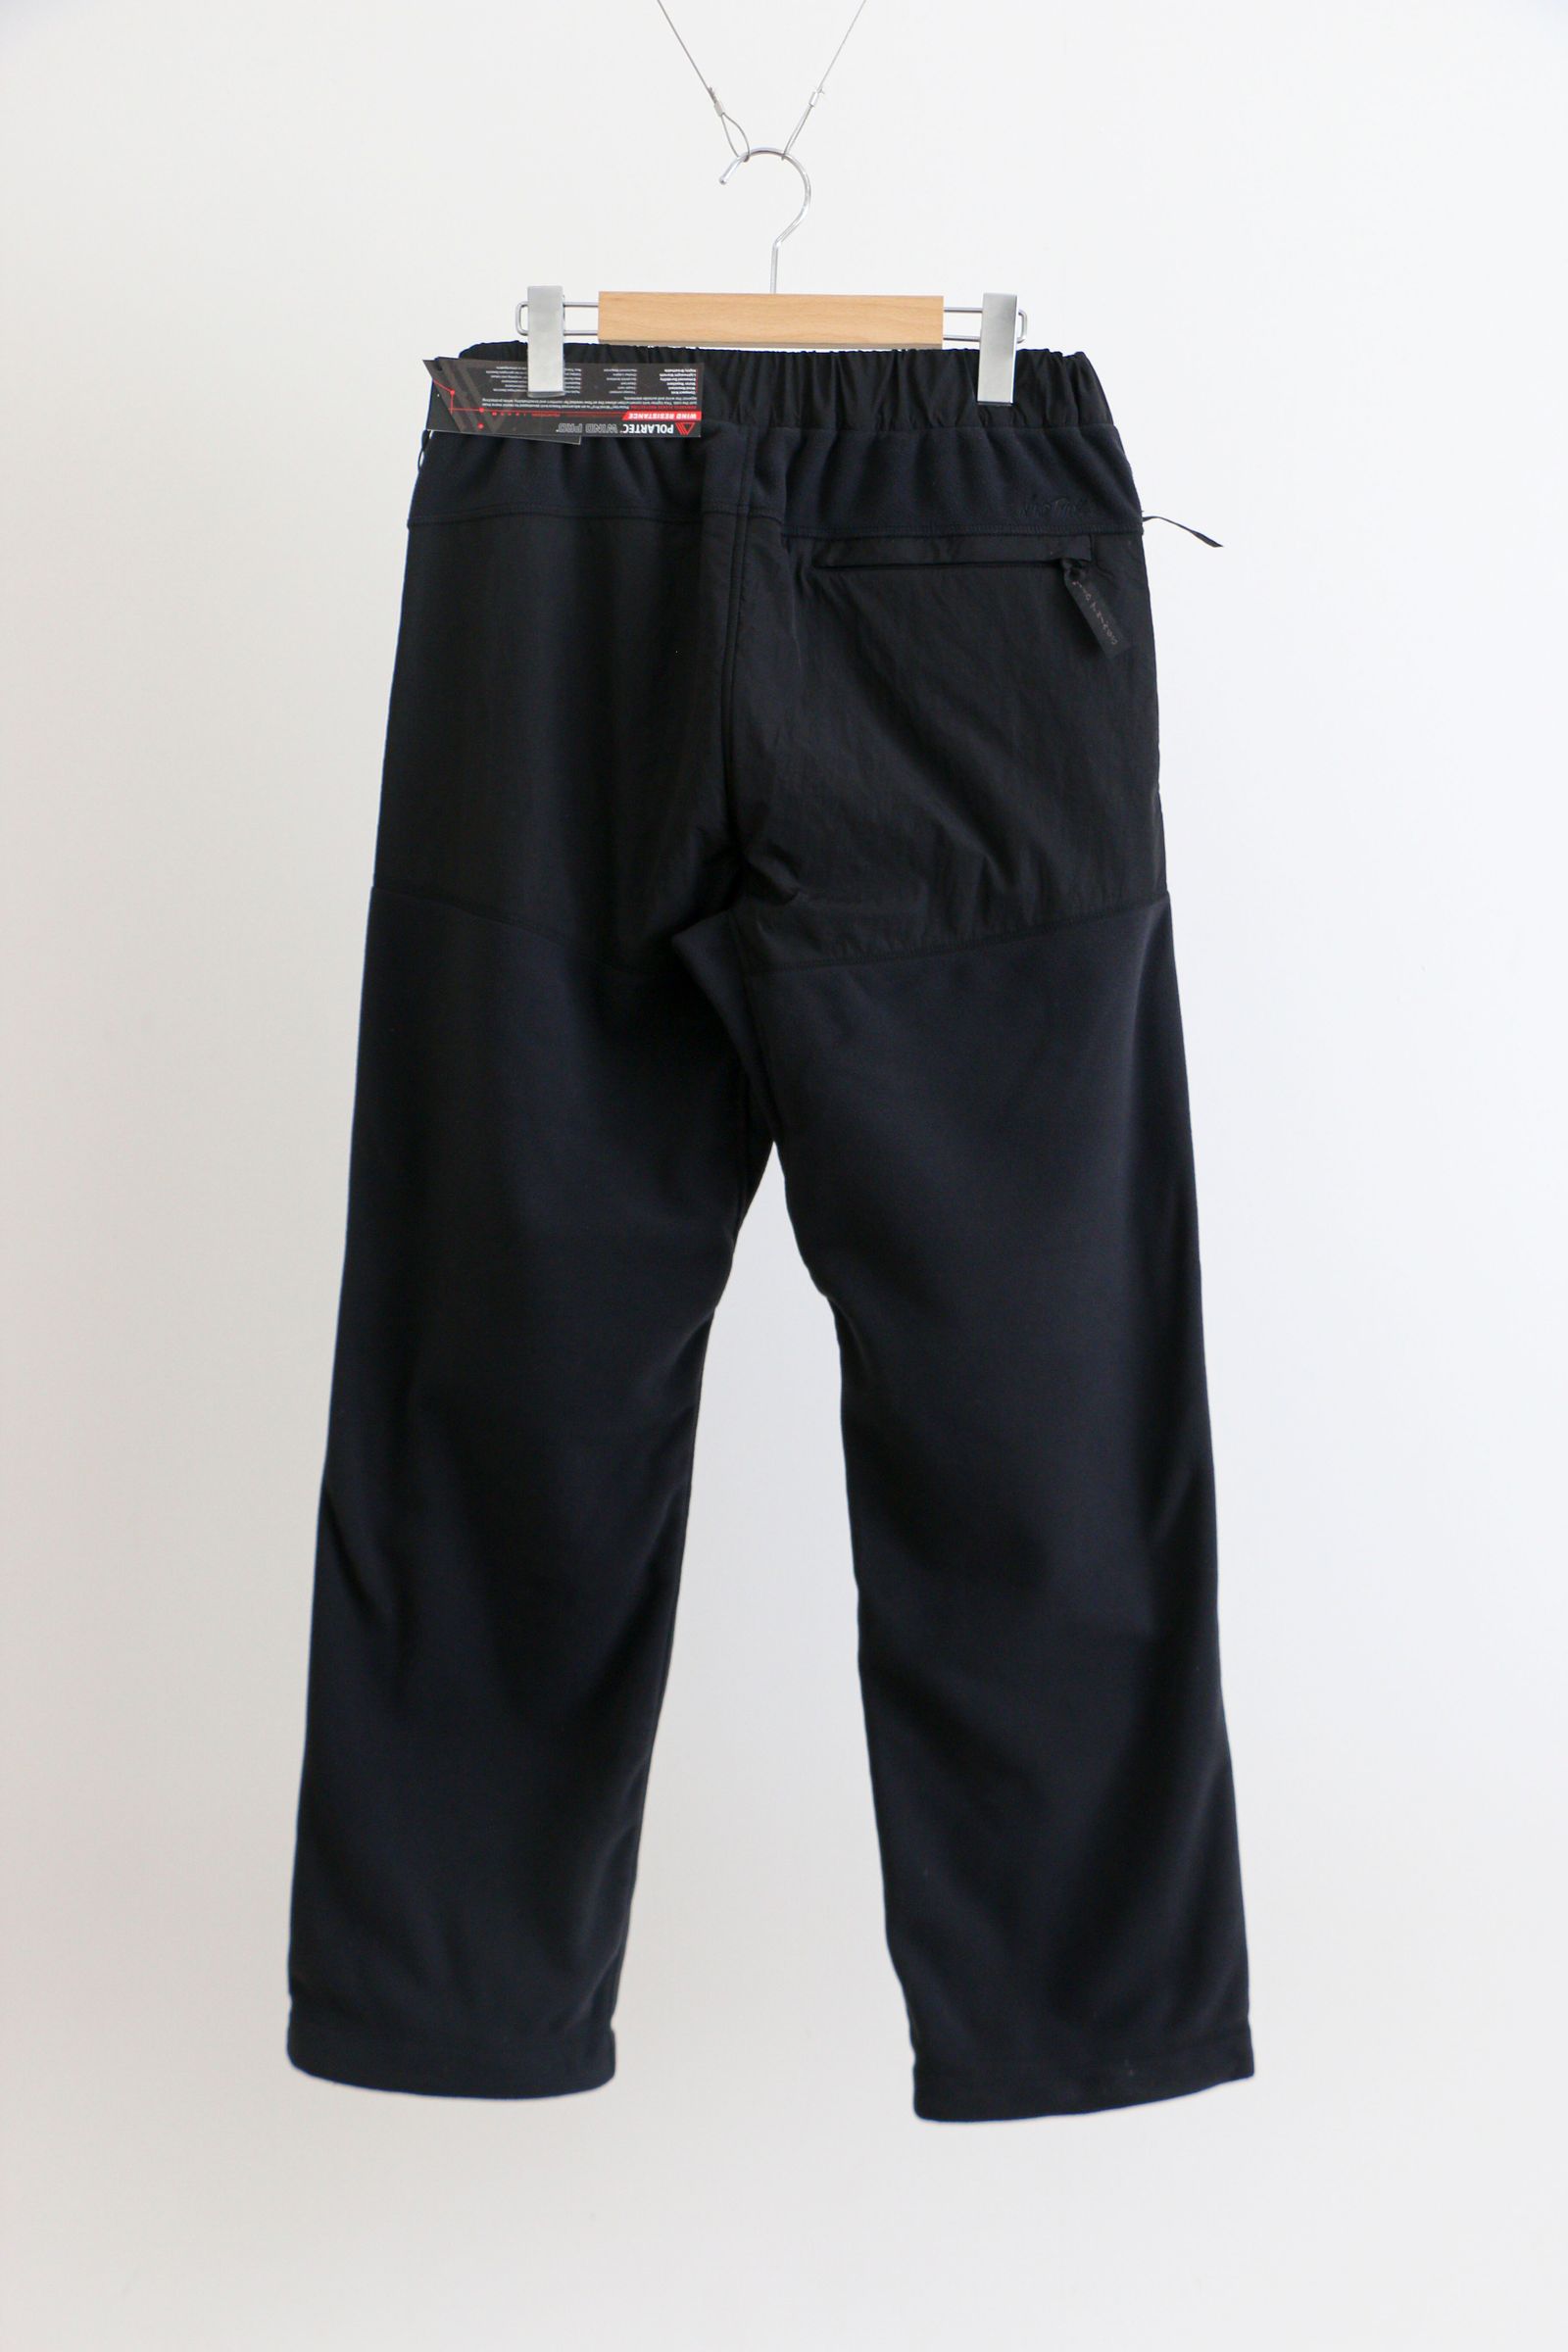 WILD THINGS - POLARTEC Wind Pro COMFY PANTS / BLACK / ポーラテック